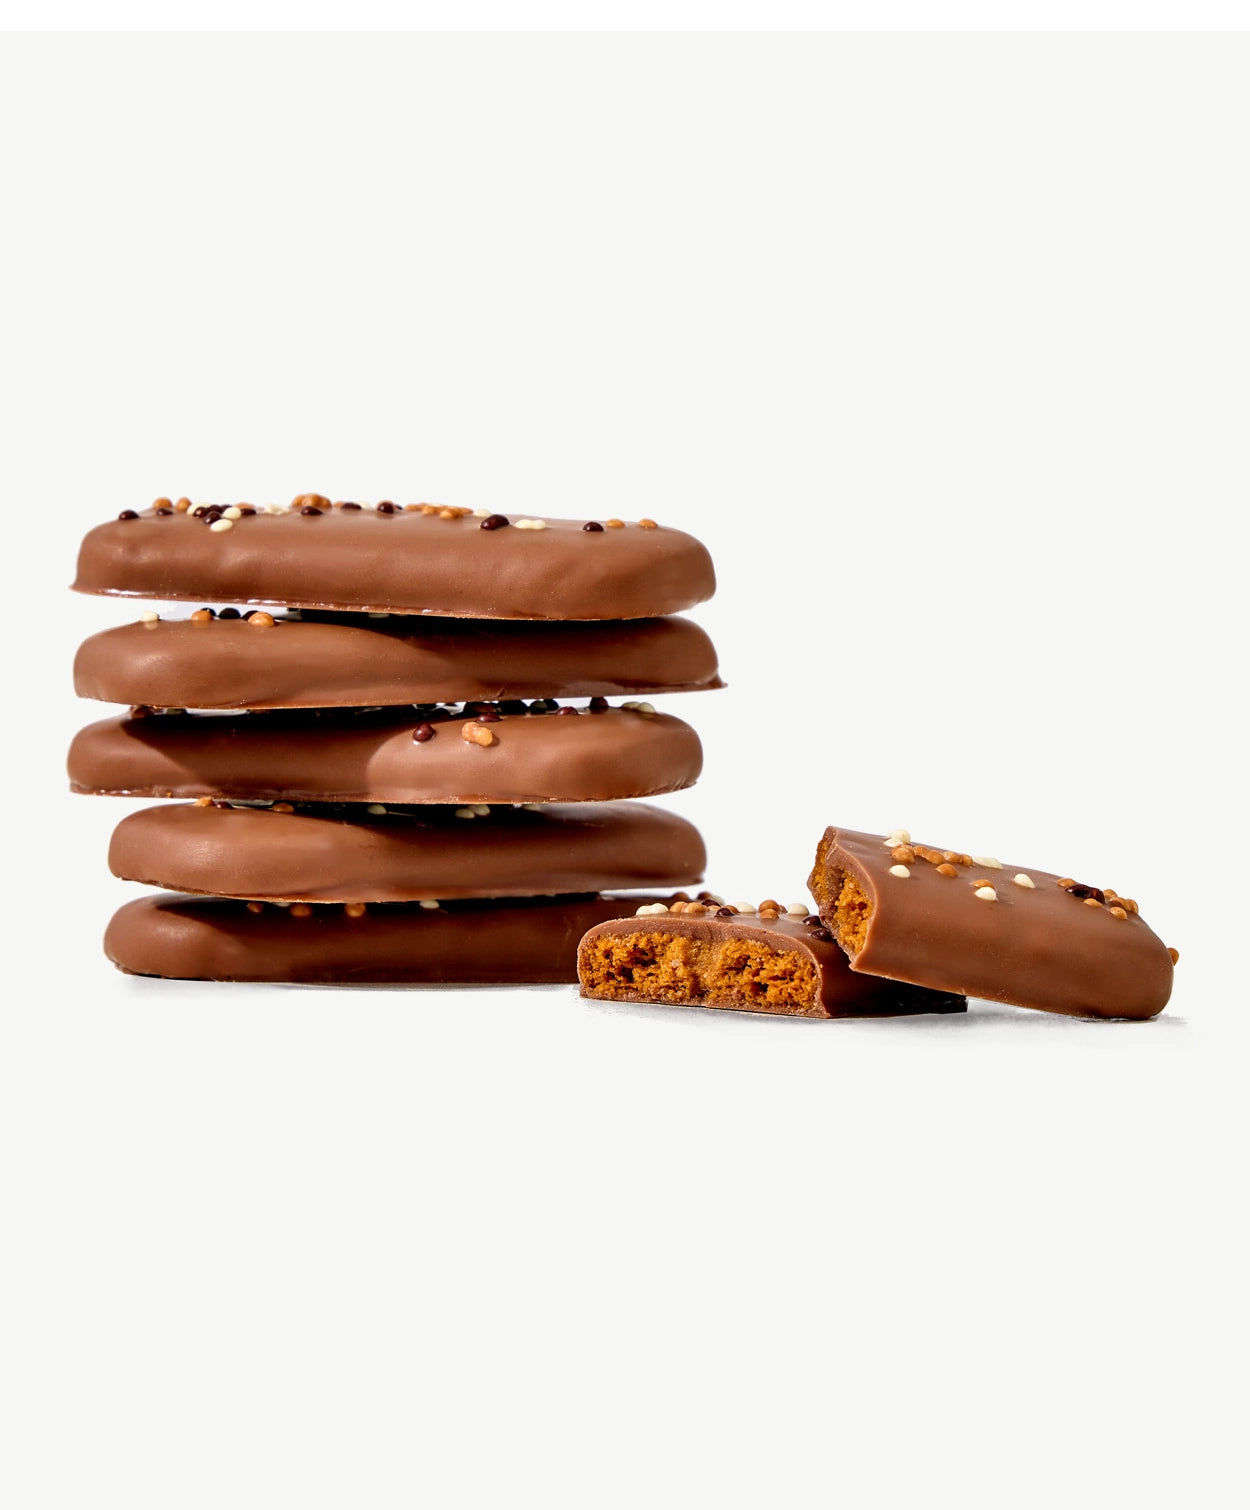 A small stack of Vosges Chocolate dipped Belgian Speculoos Cookies adorned with sprinkles on a white background.